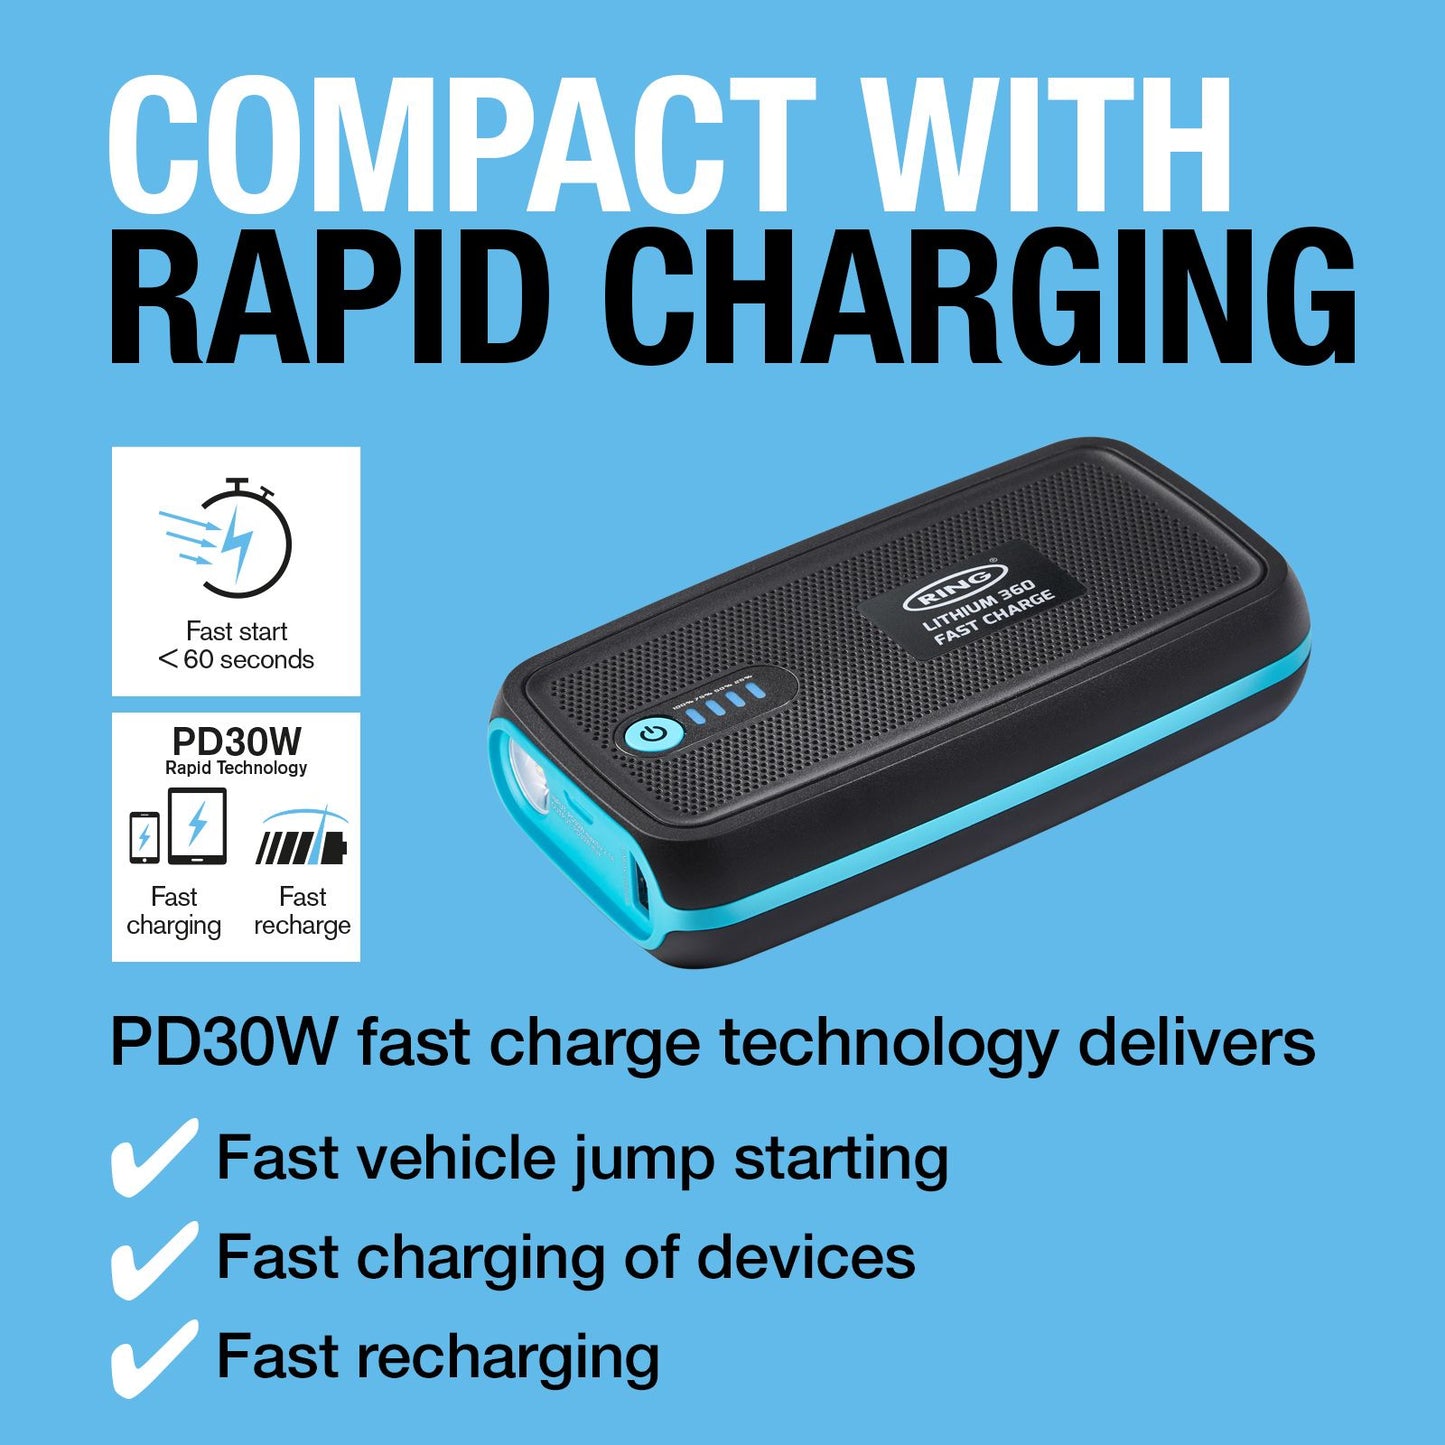 Ring Fast Charge Jump Starter 360 specs